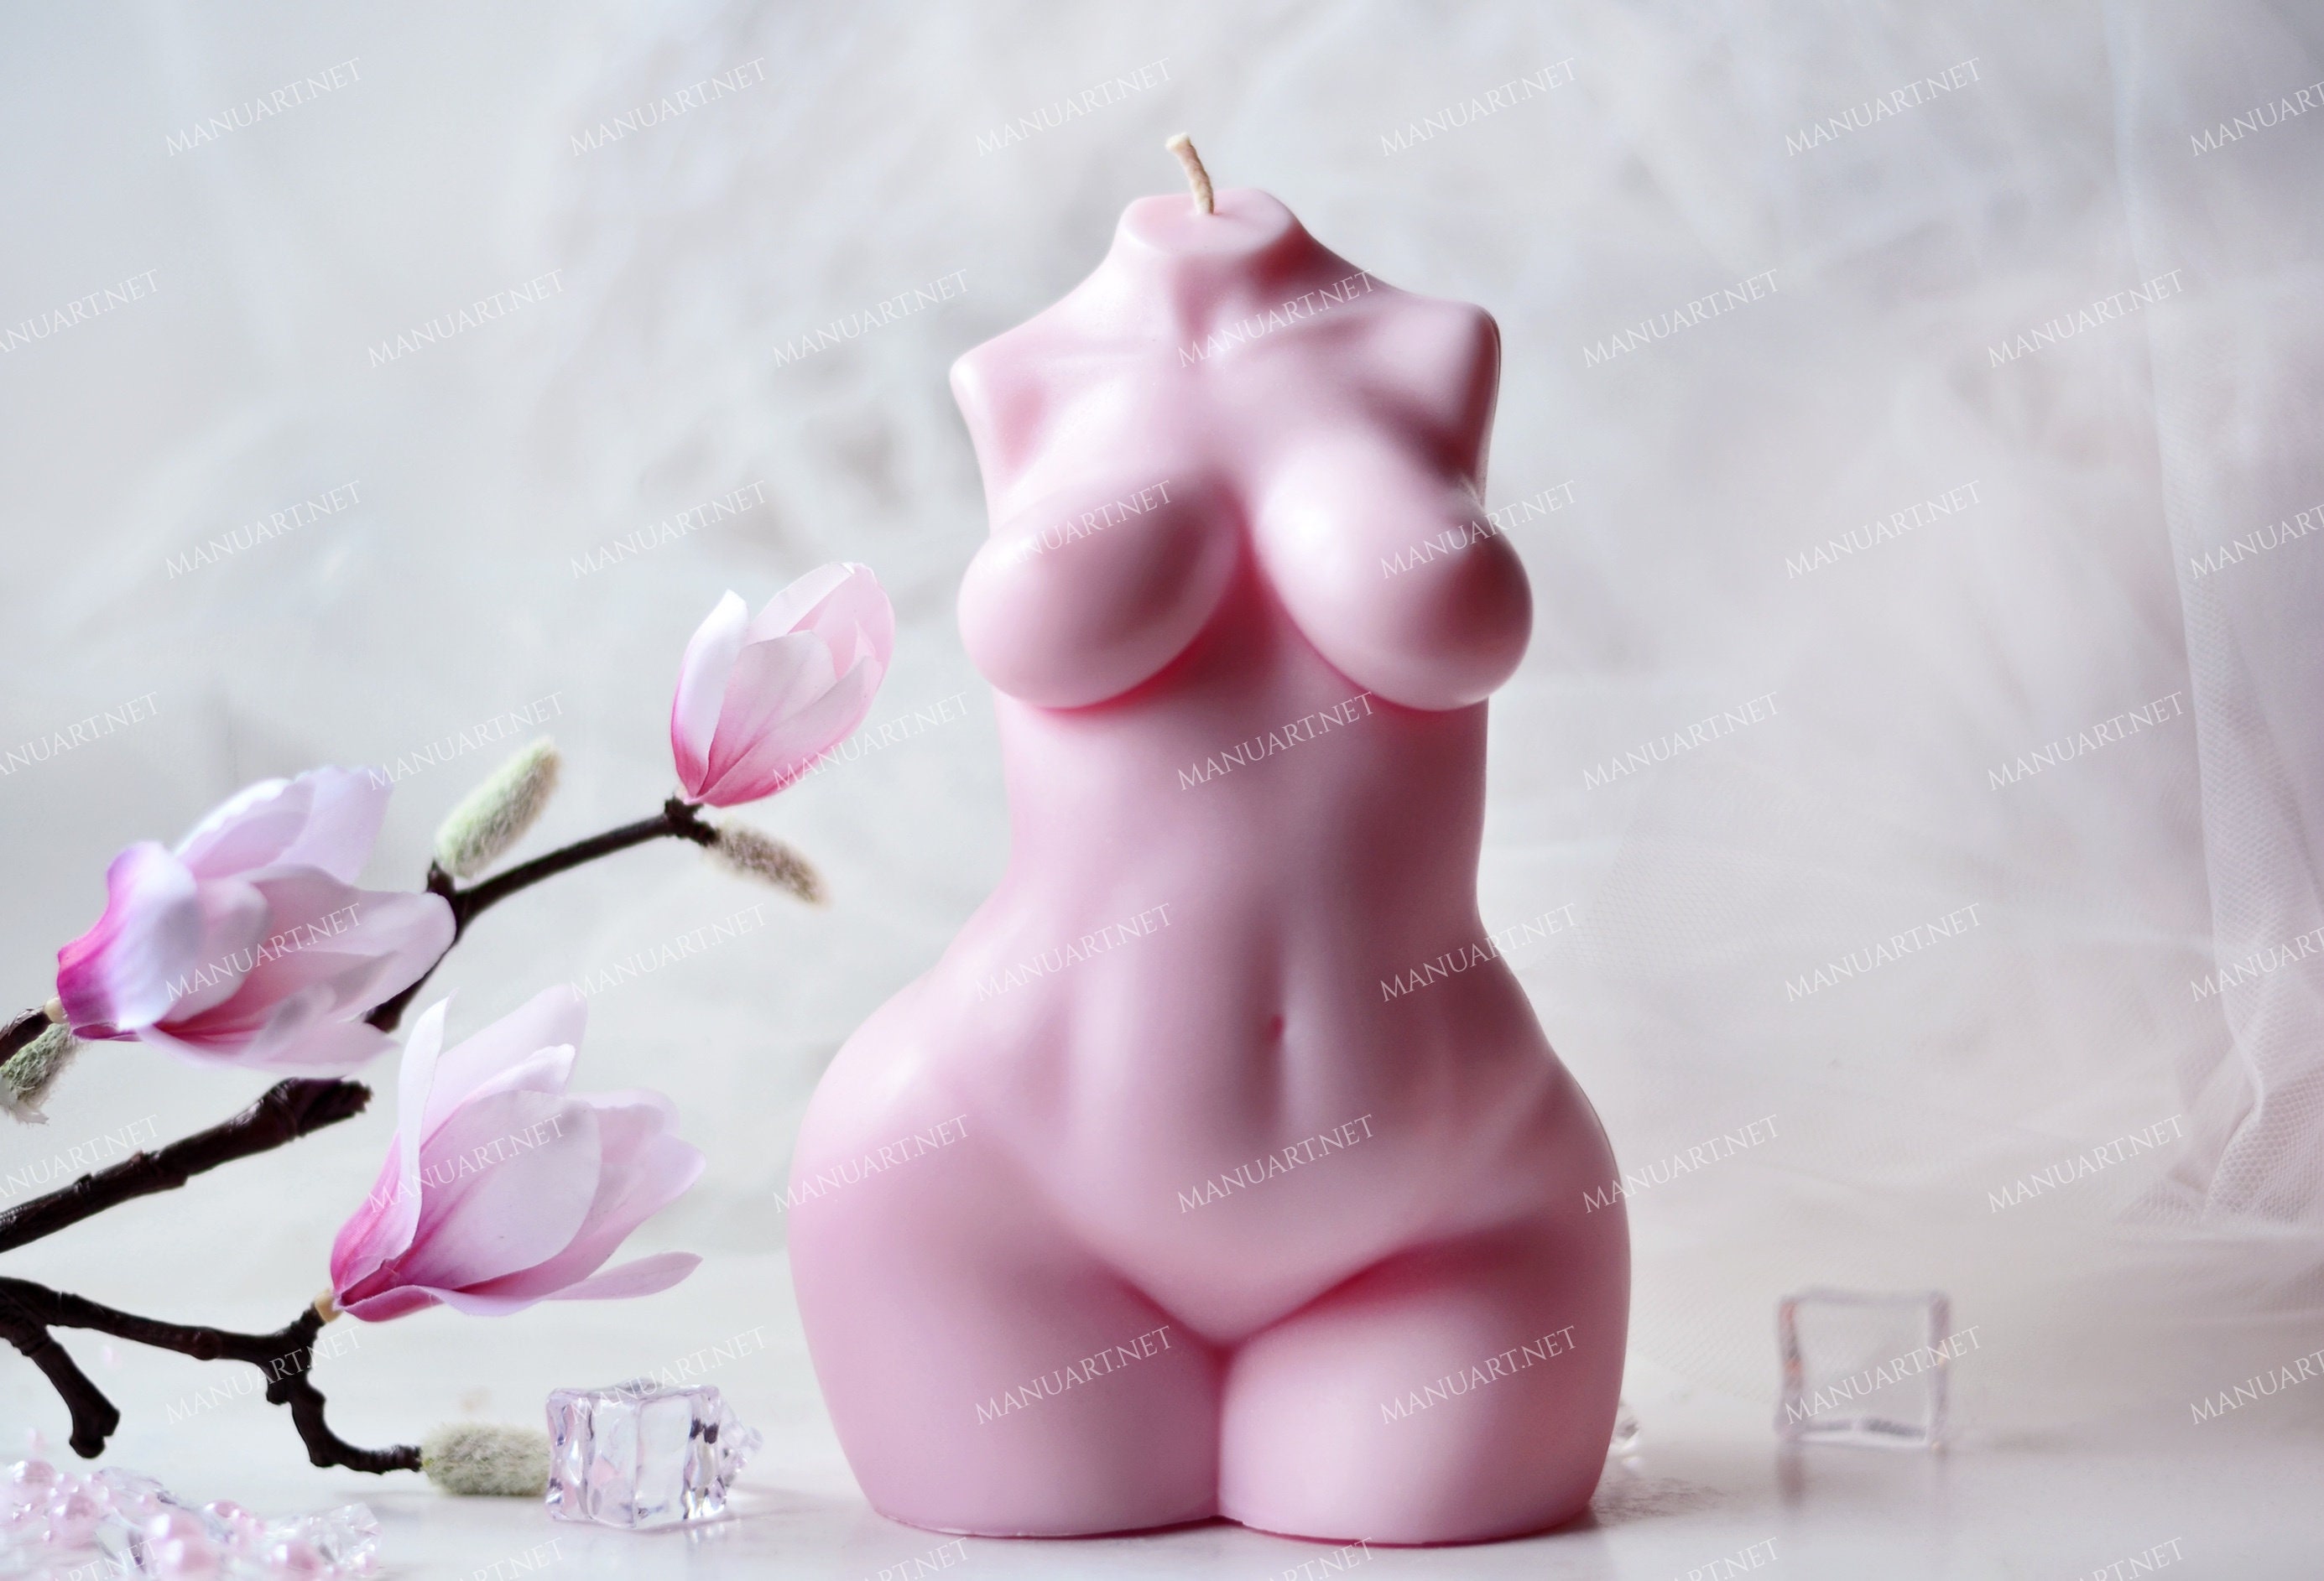 LARGE 20 Cm 8 Inch Curvy Female Torso 3D Silicone Mold, Resin, Goddess,  Naked, Candle Mould, Plus Size, Breast, Woman, Statue, Full Figure -   Hong Kong